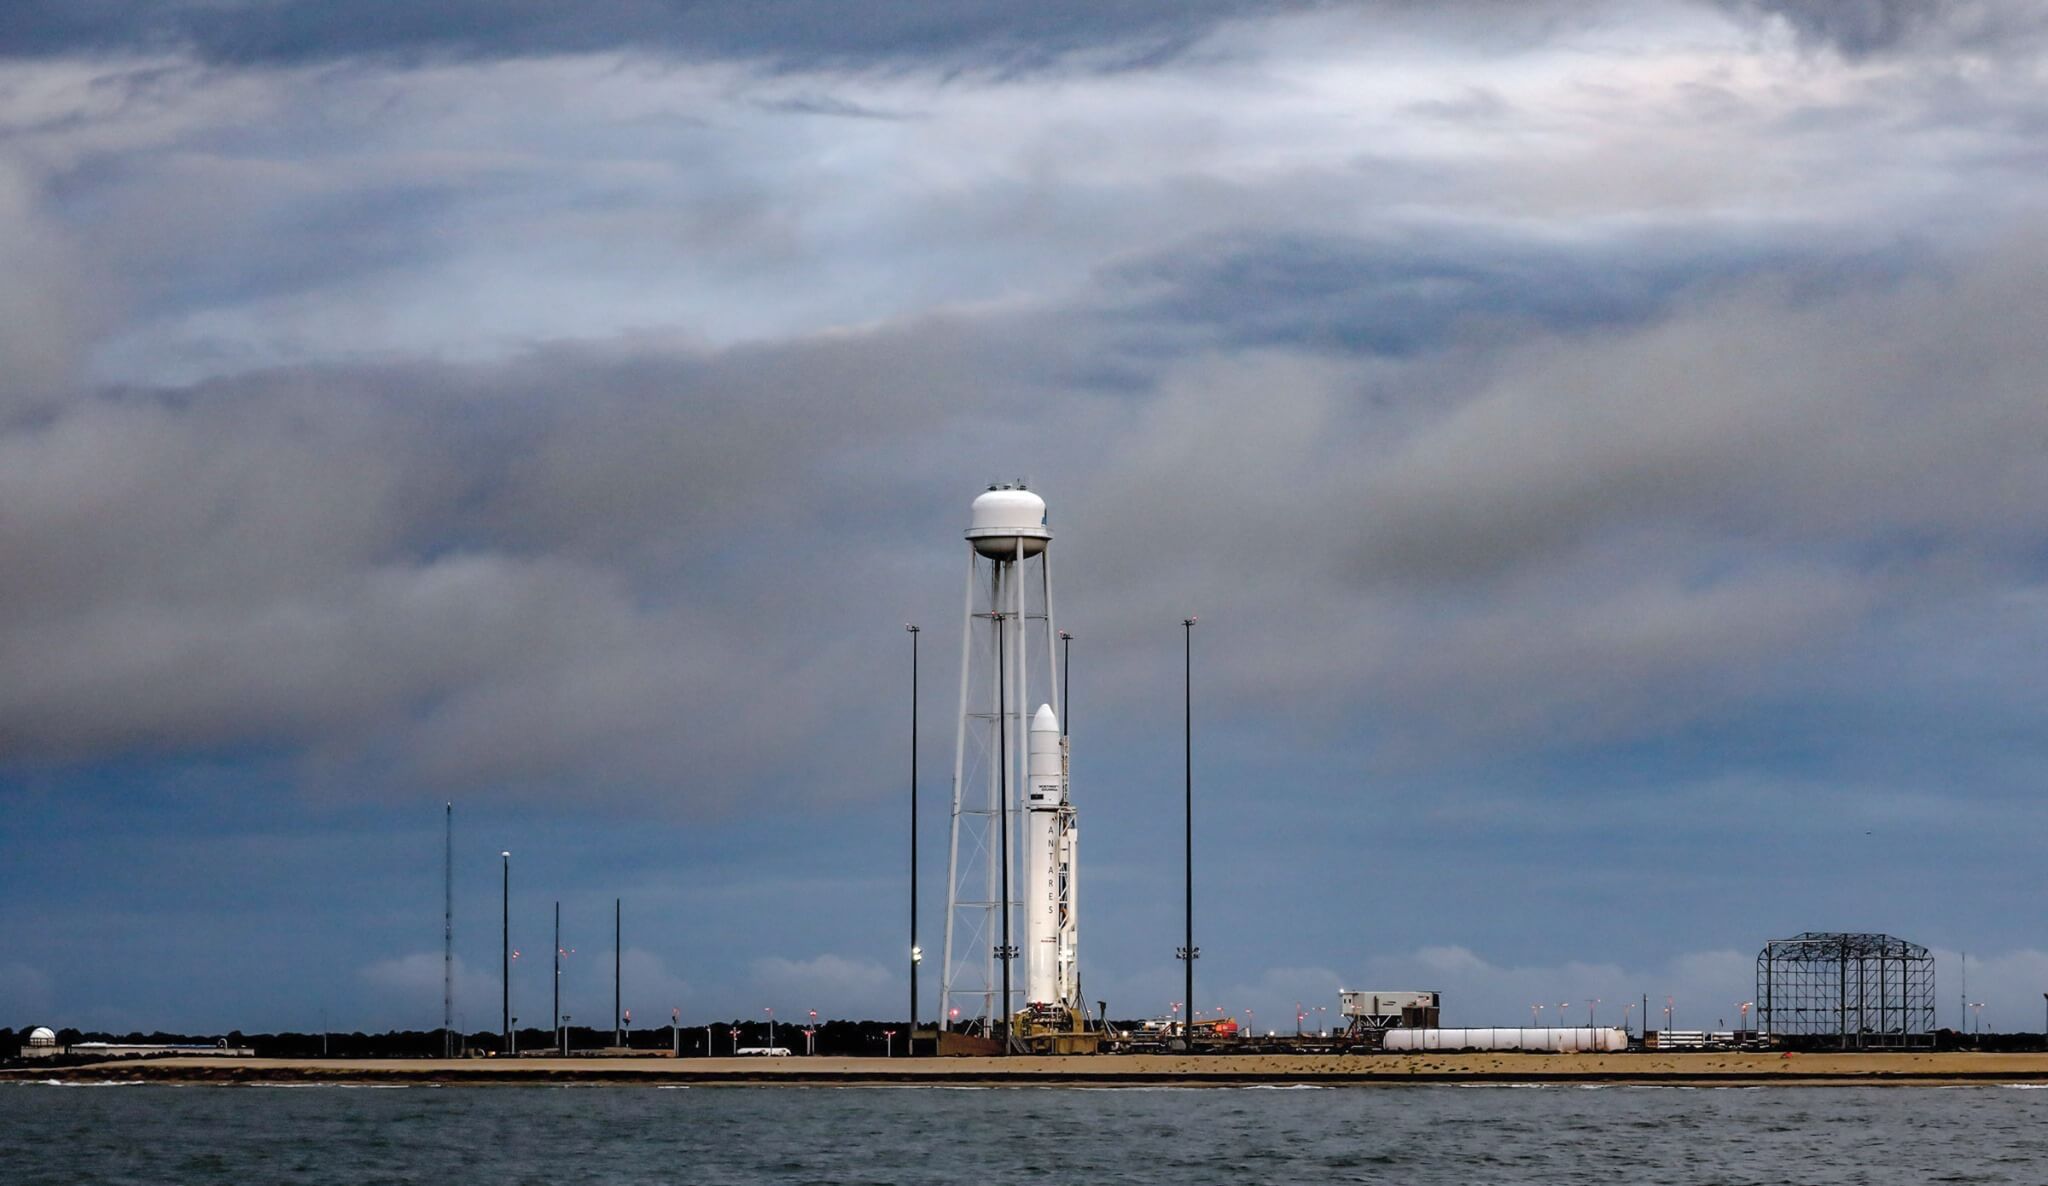 Successful launch of the Antares LV